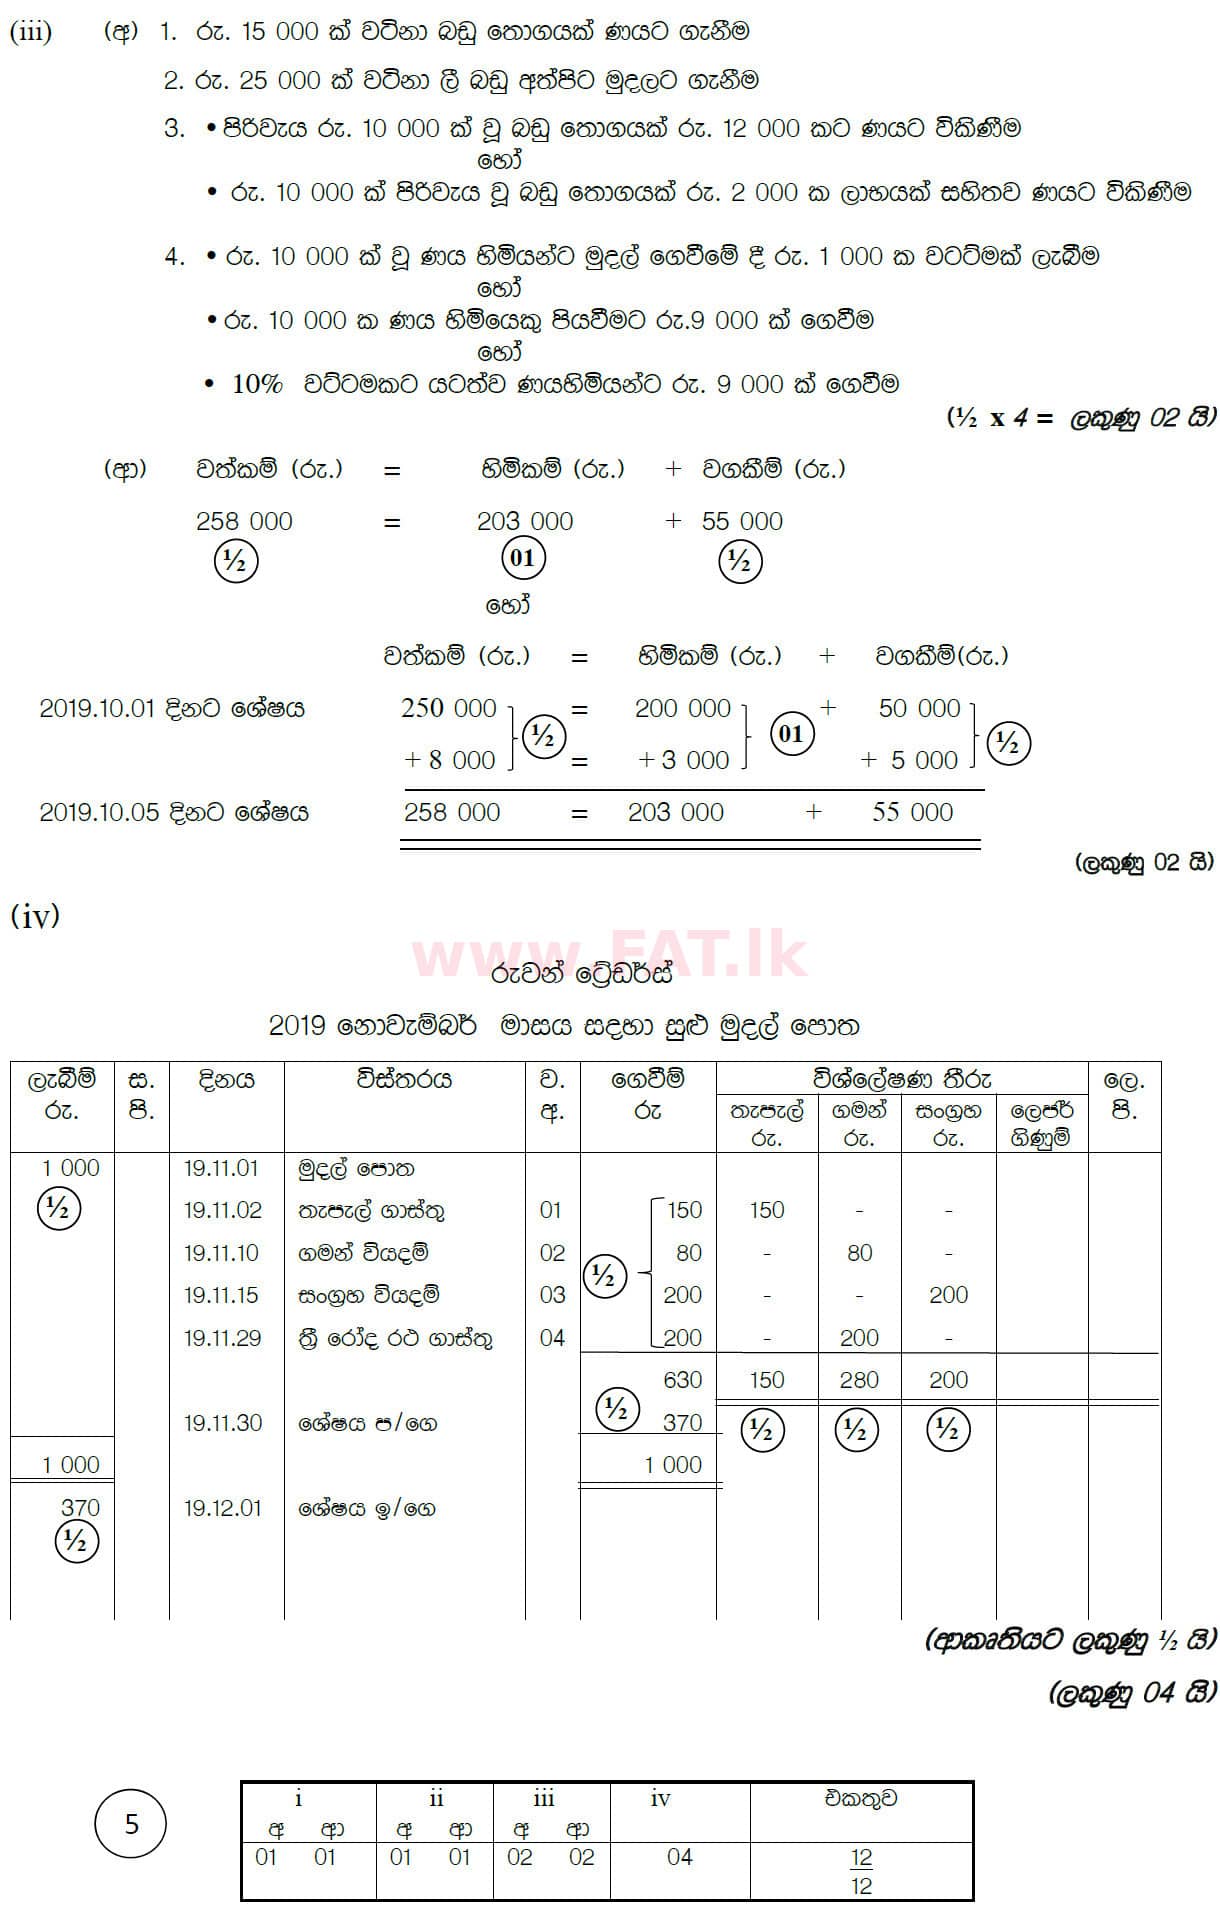 National Syllabus : Ordinary Level (O/L) Business and Accounting Studies - 2019 March - Paper II (සිංහල Medium) 5 5896